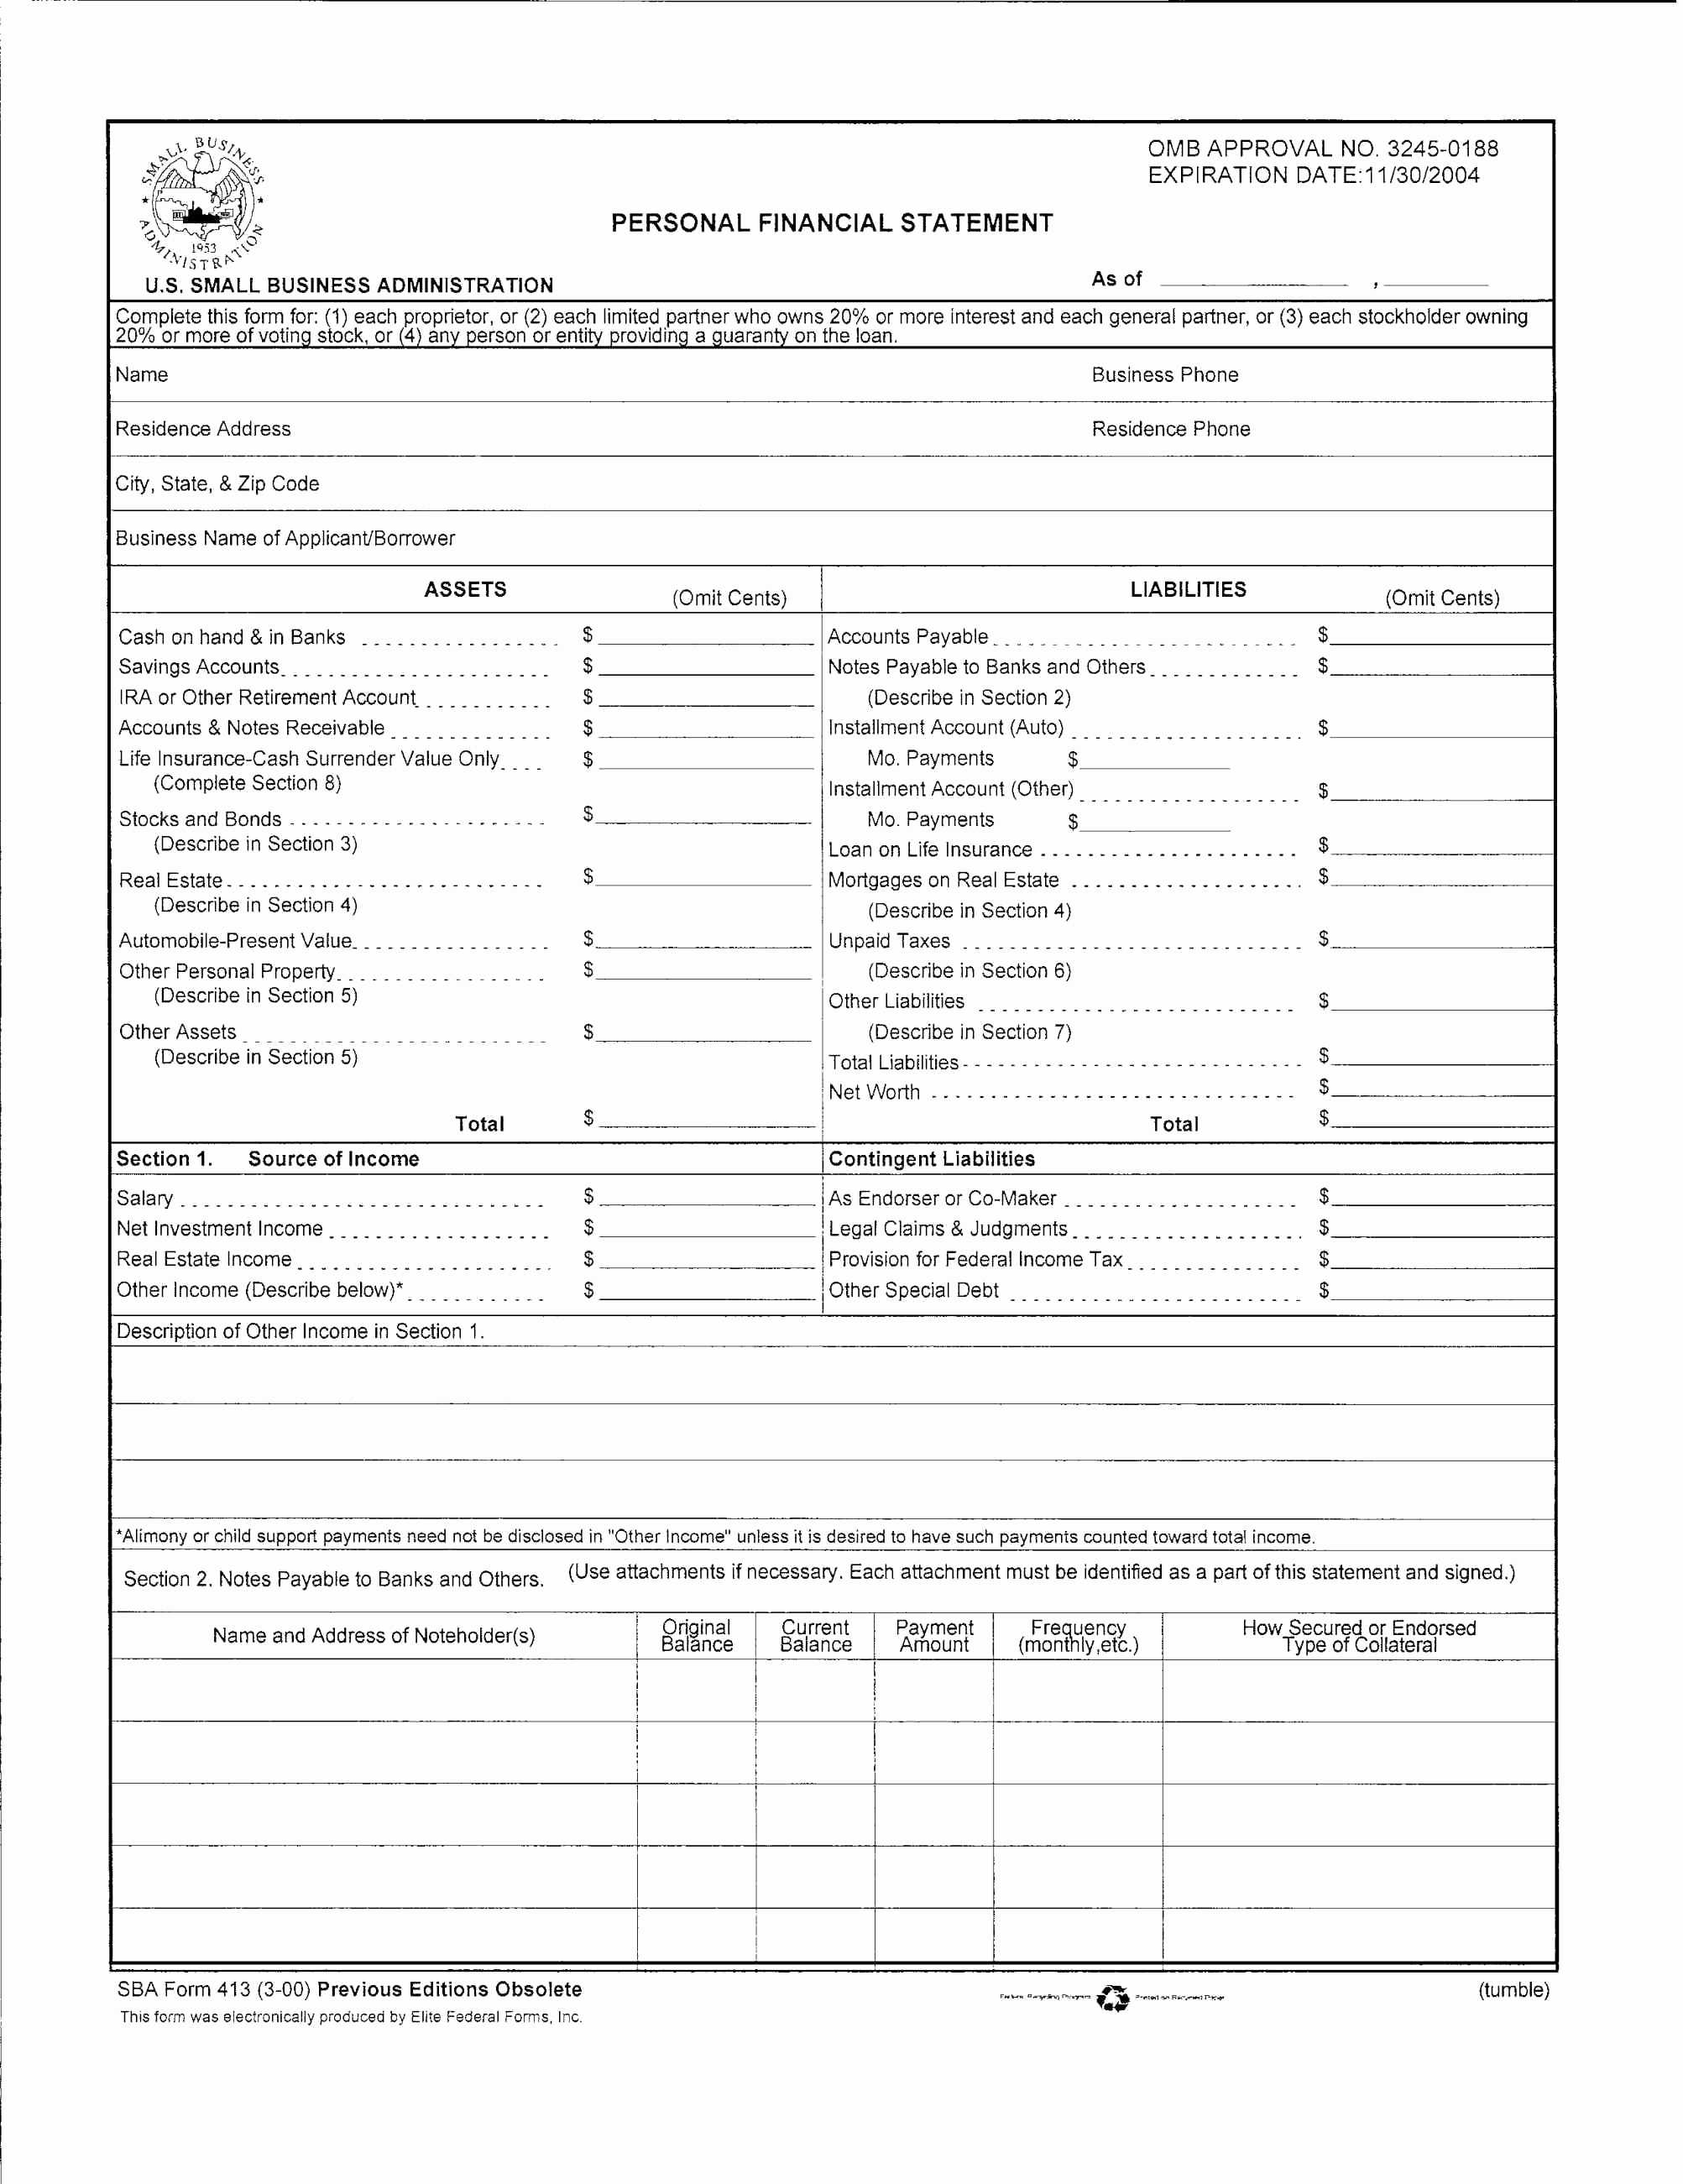 Income Calculation Worksheet for Mortgage together with 50 Awesome Mercial Lease Analysis Spreadsheet Documents Ideas